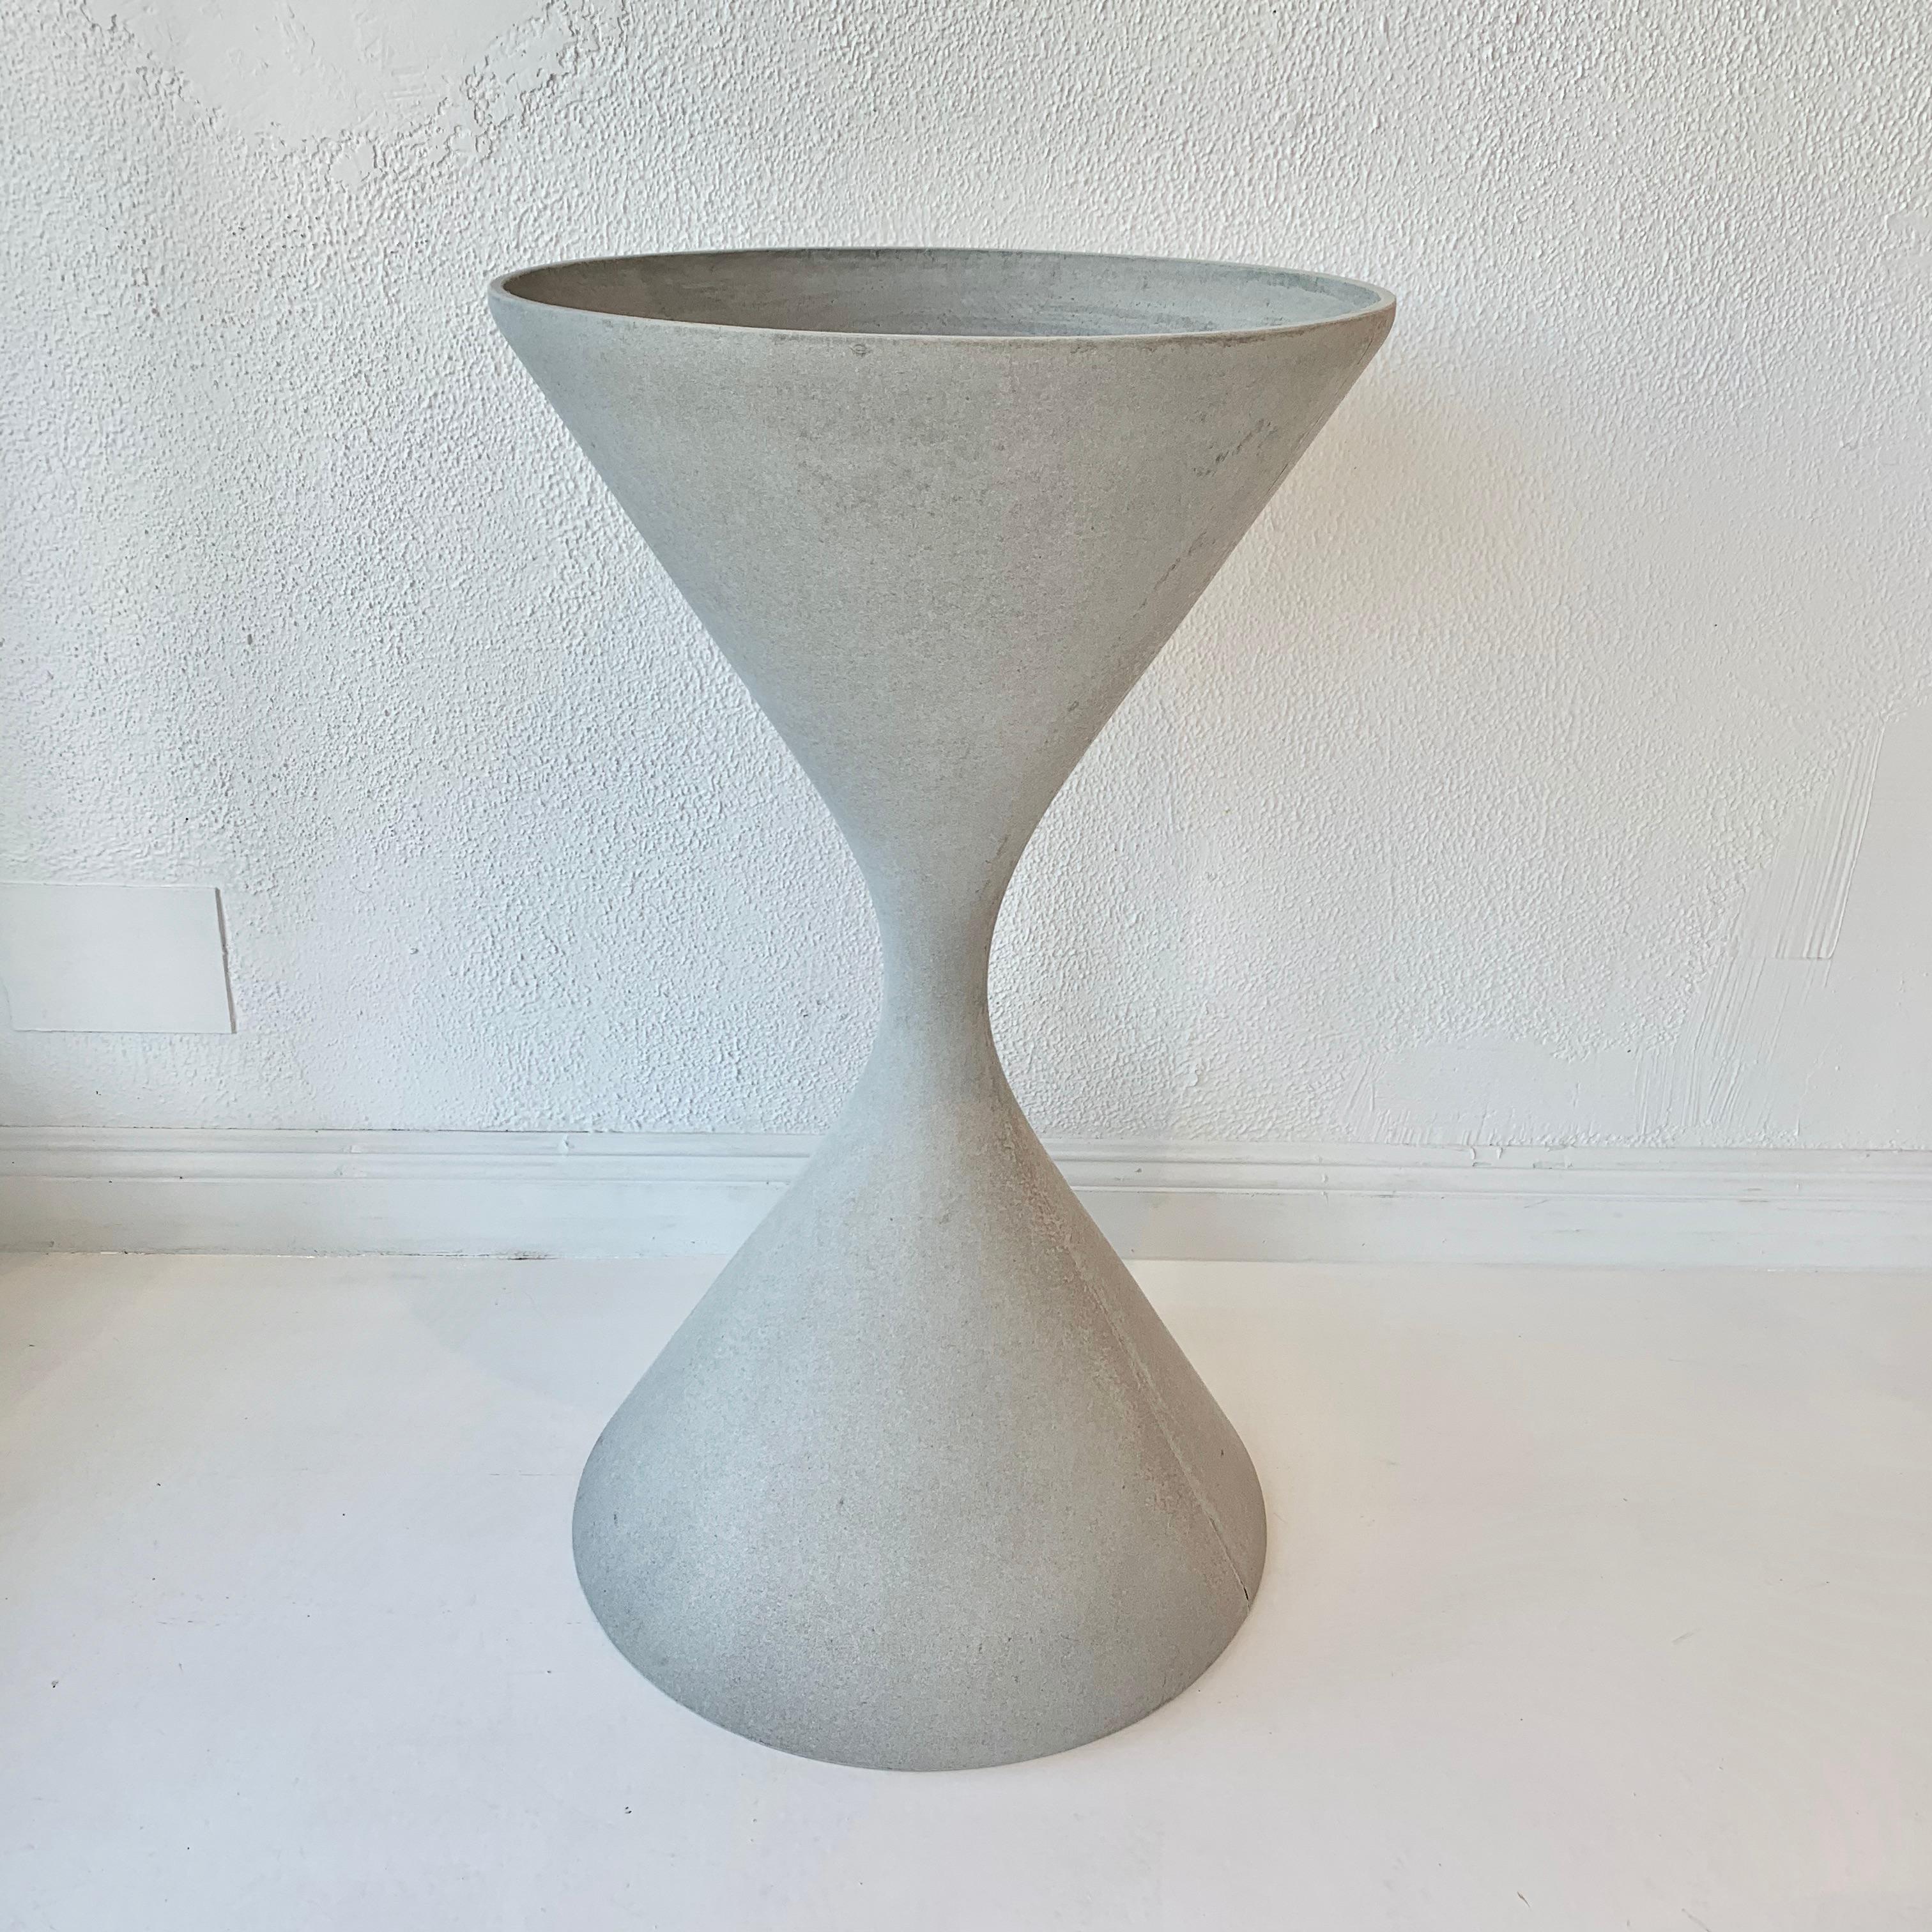 Cement Willy Guhl New Production Spindel Hourglass Planters For Sale